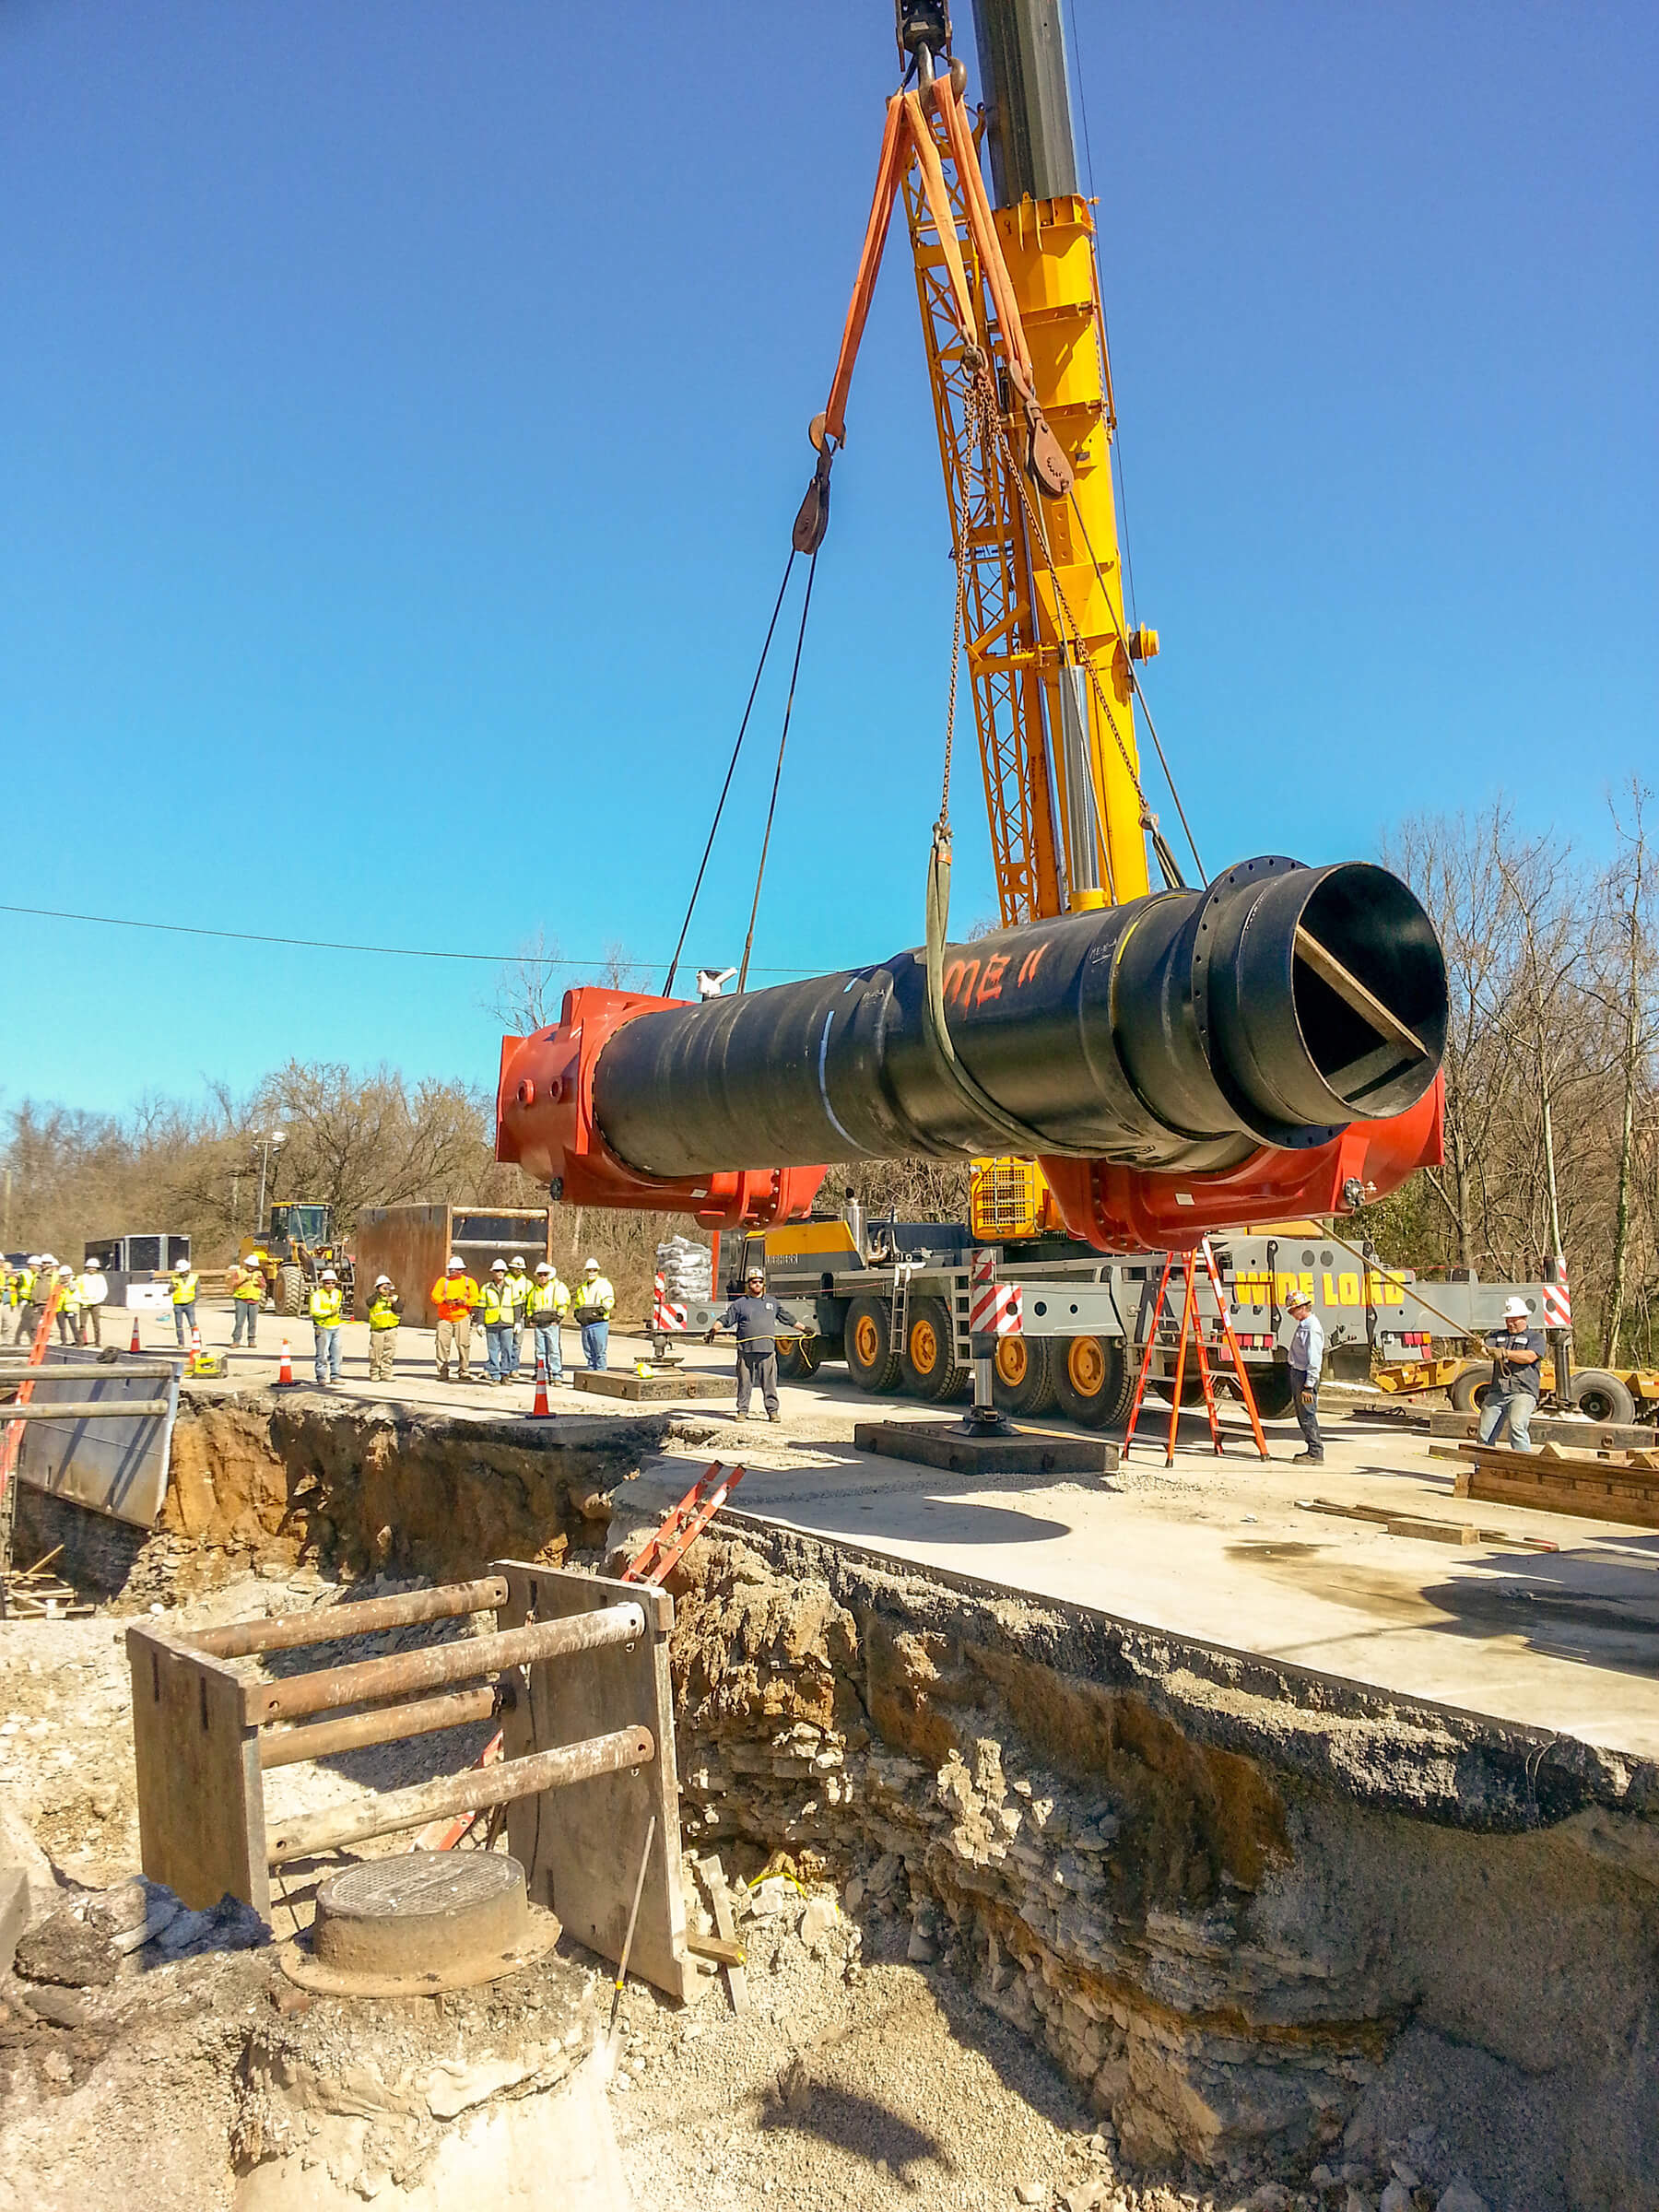 A large pipe being lowered into the ground by a crane